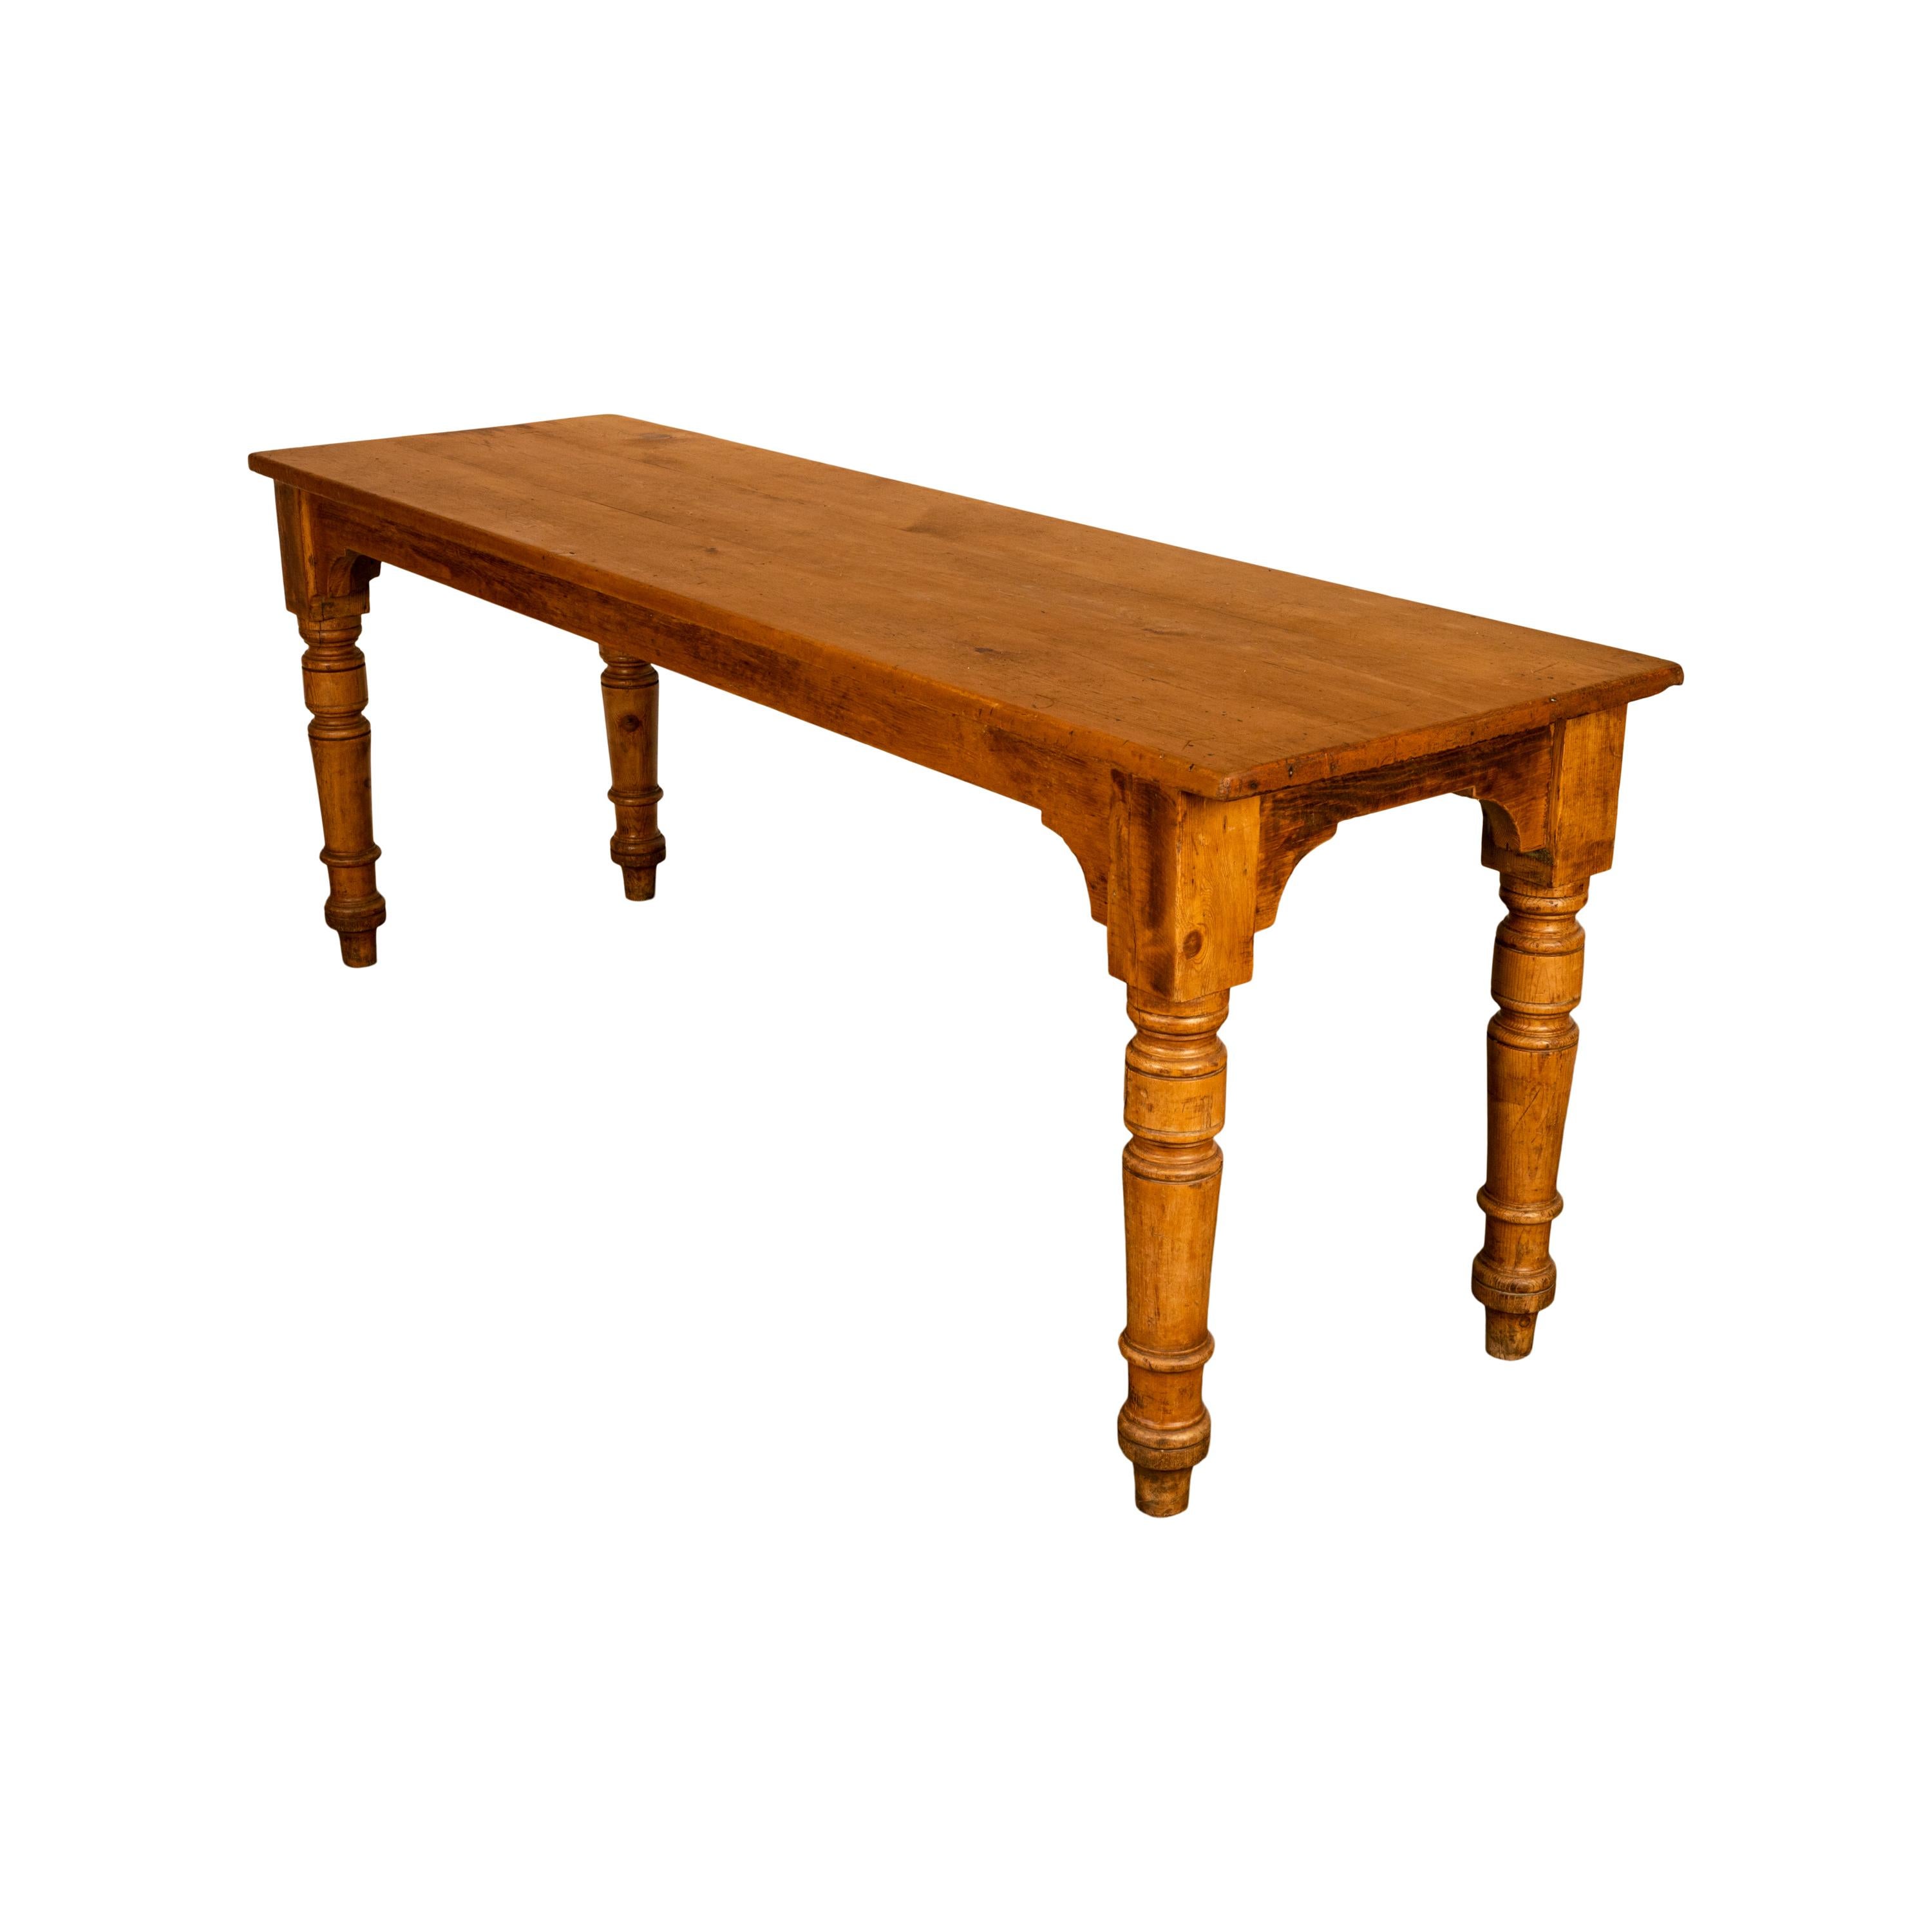 Mid-19th Century Antique 19th Century English Pine Country Farmhouse 8 seat Dining Table 1860 For Sale